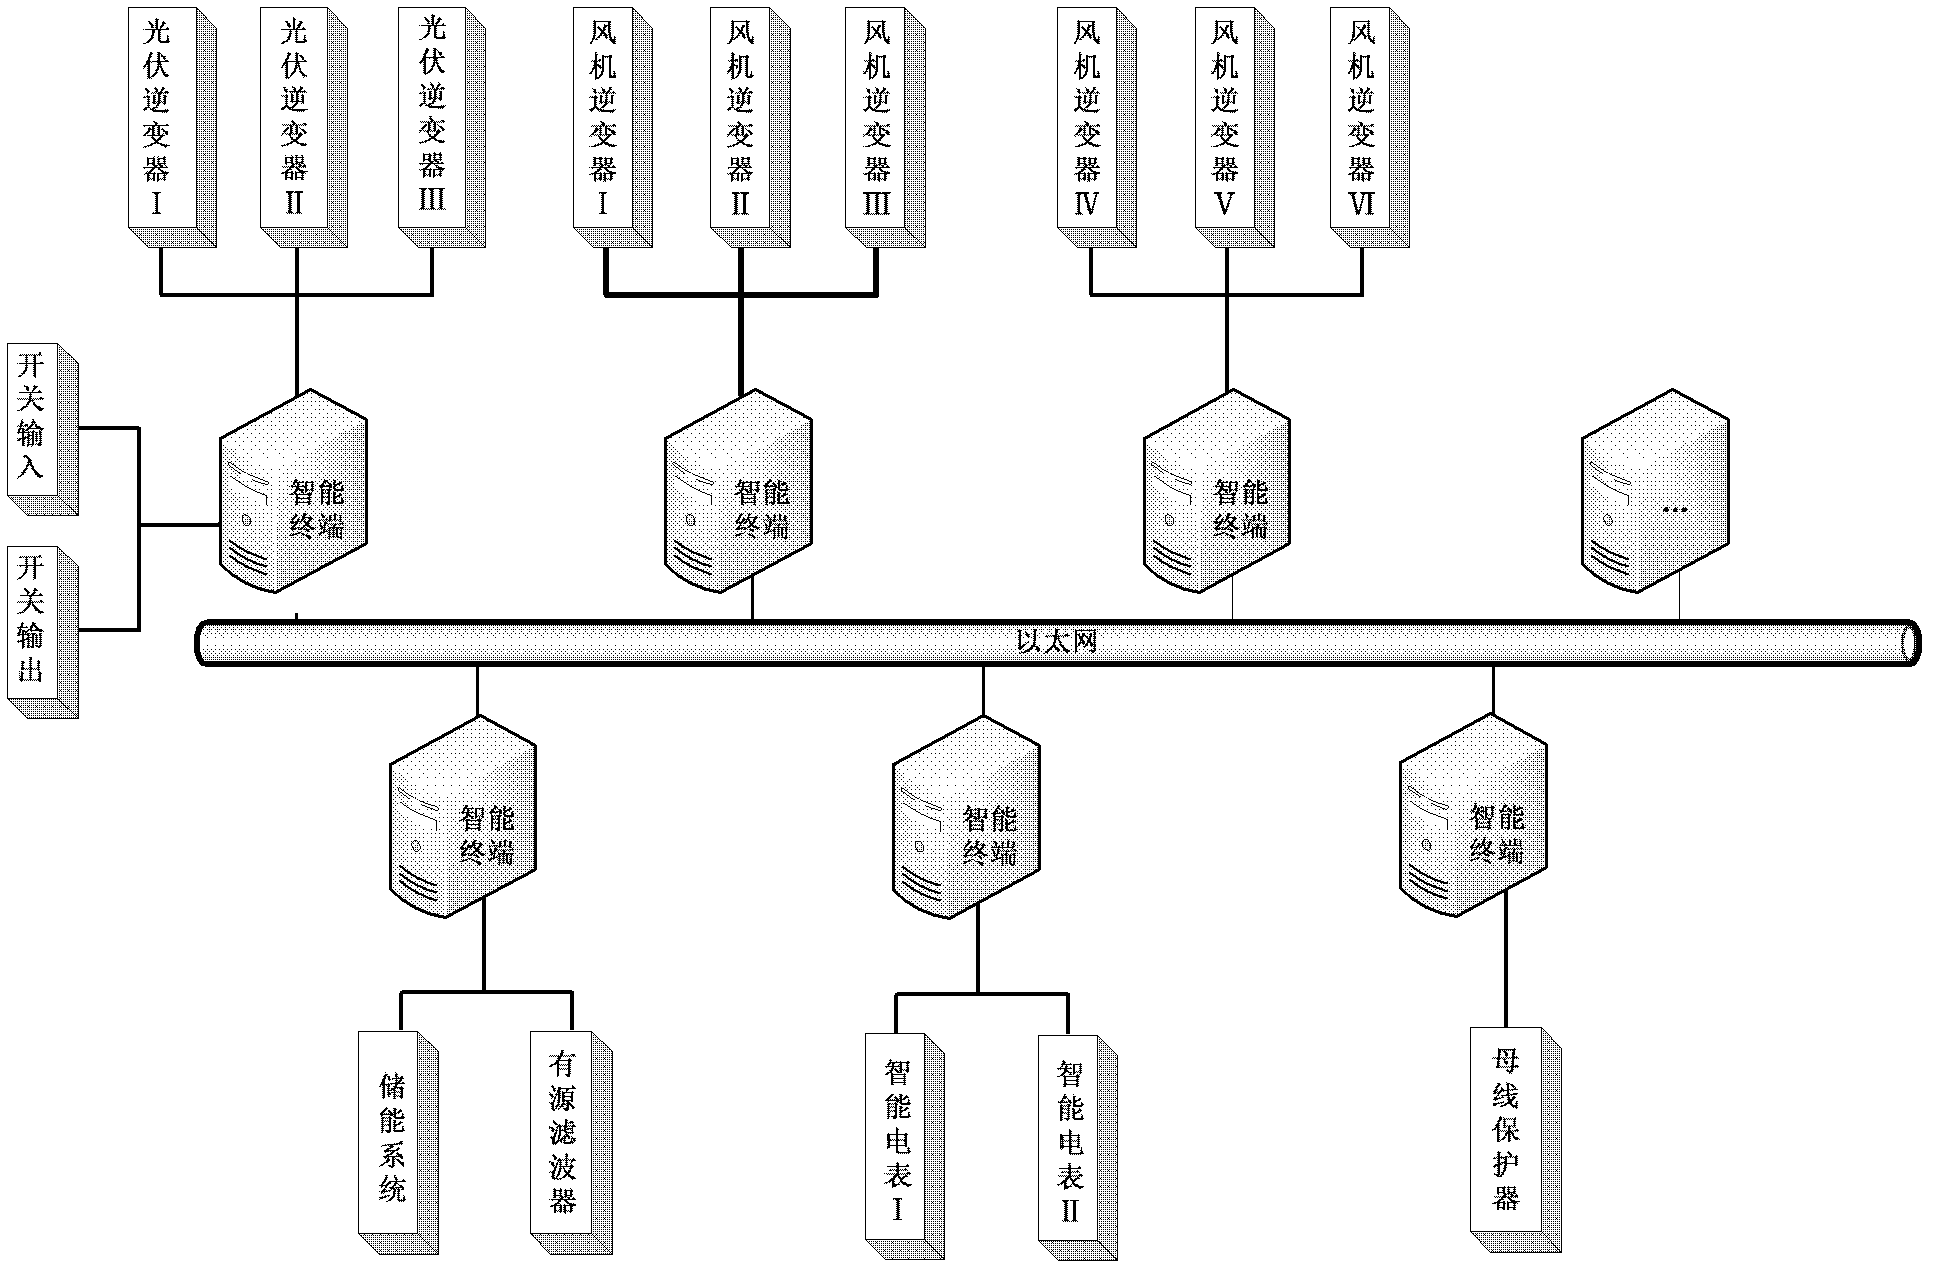 Method for realizing real-time database for miniature power grid intelligent terminal